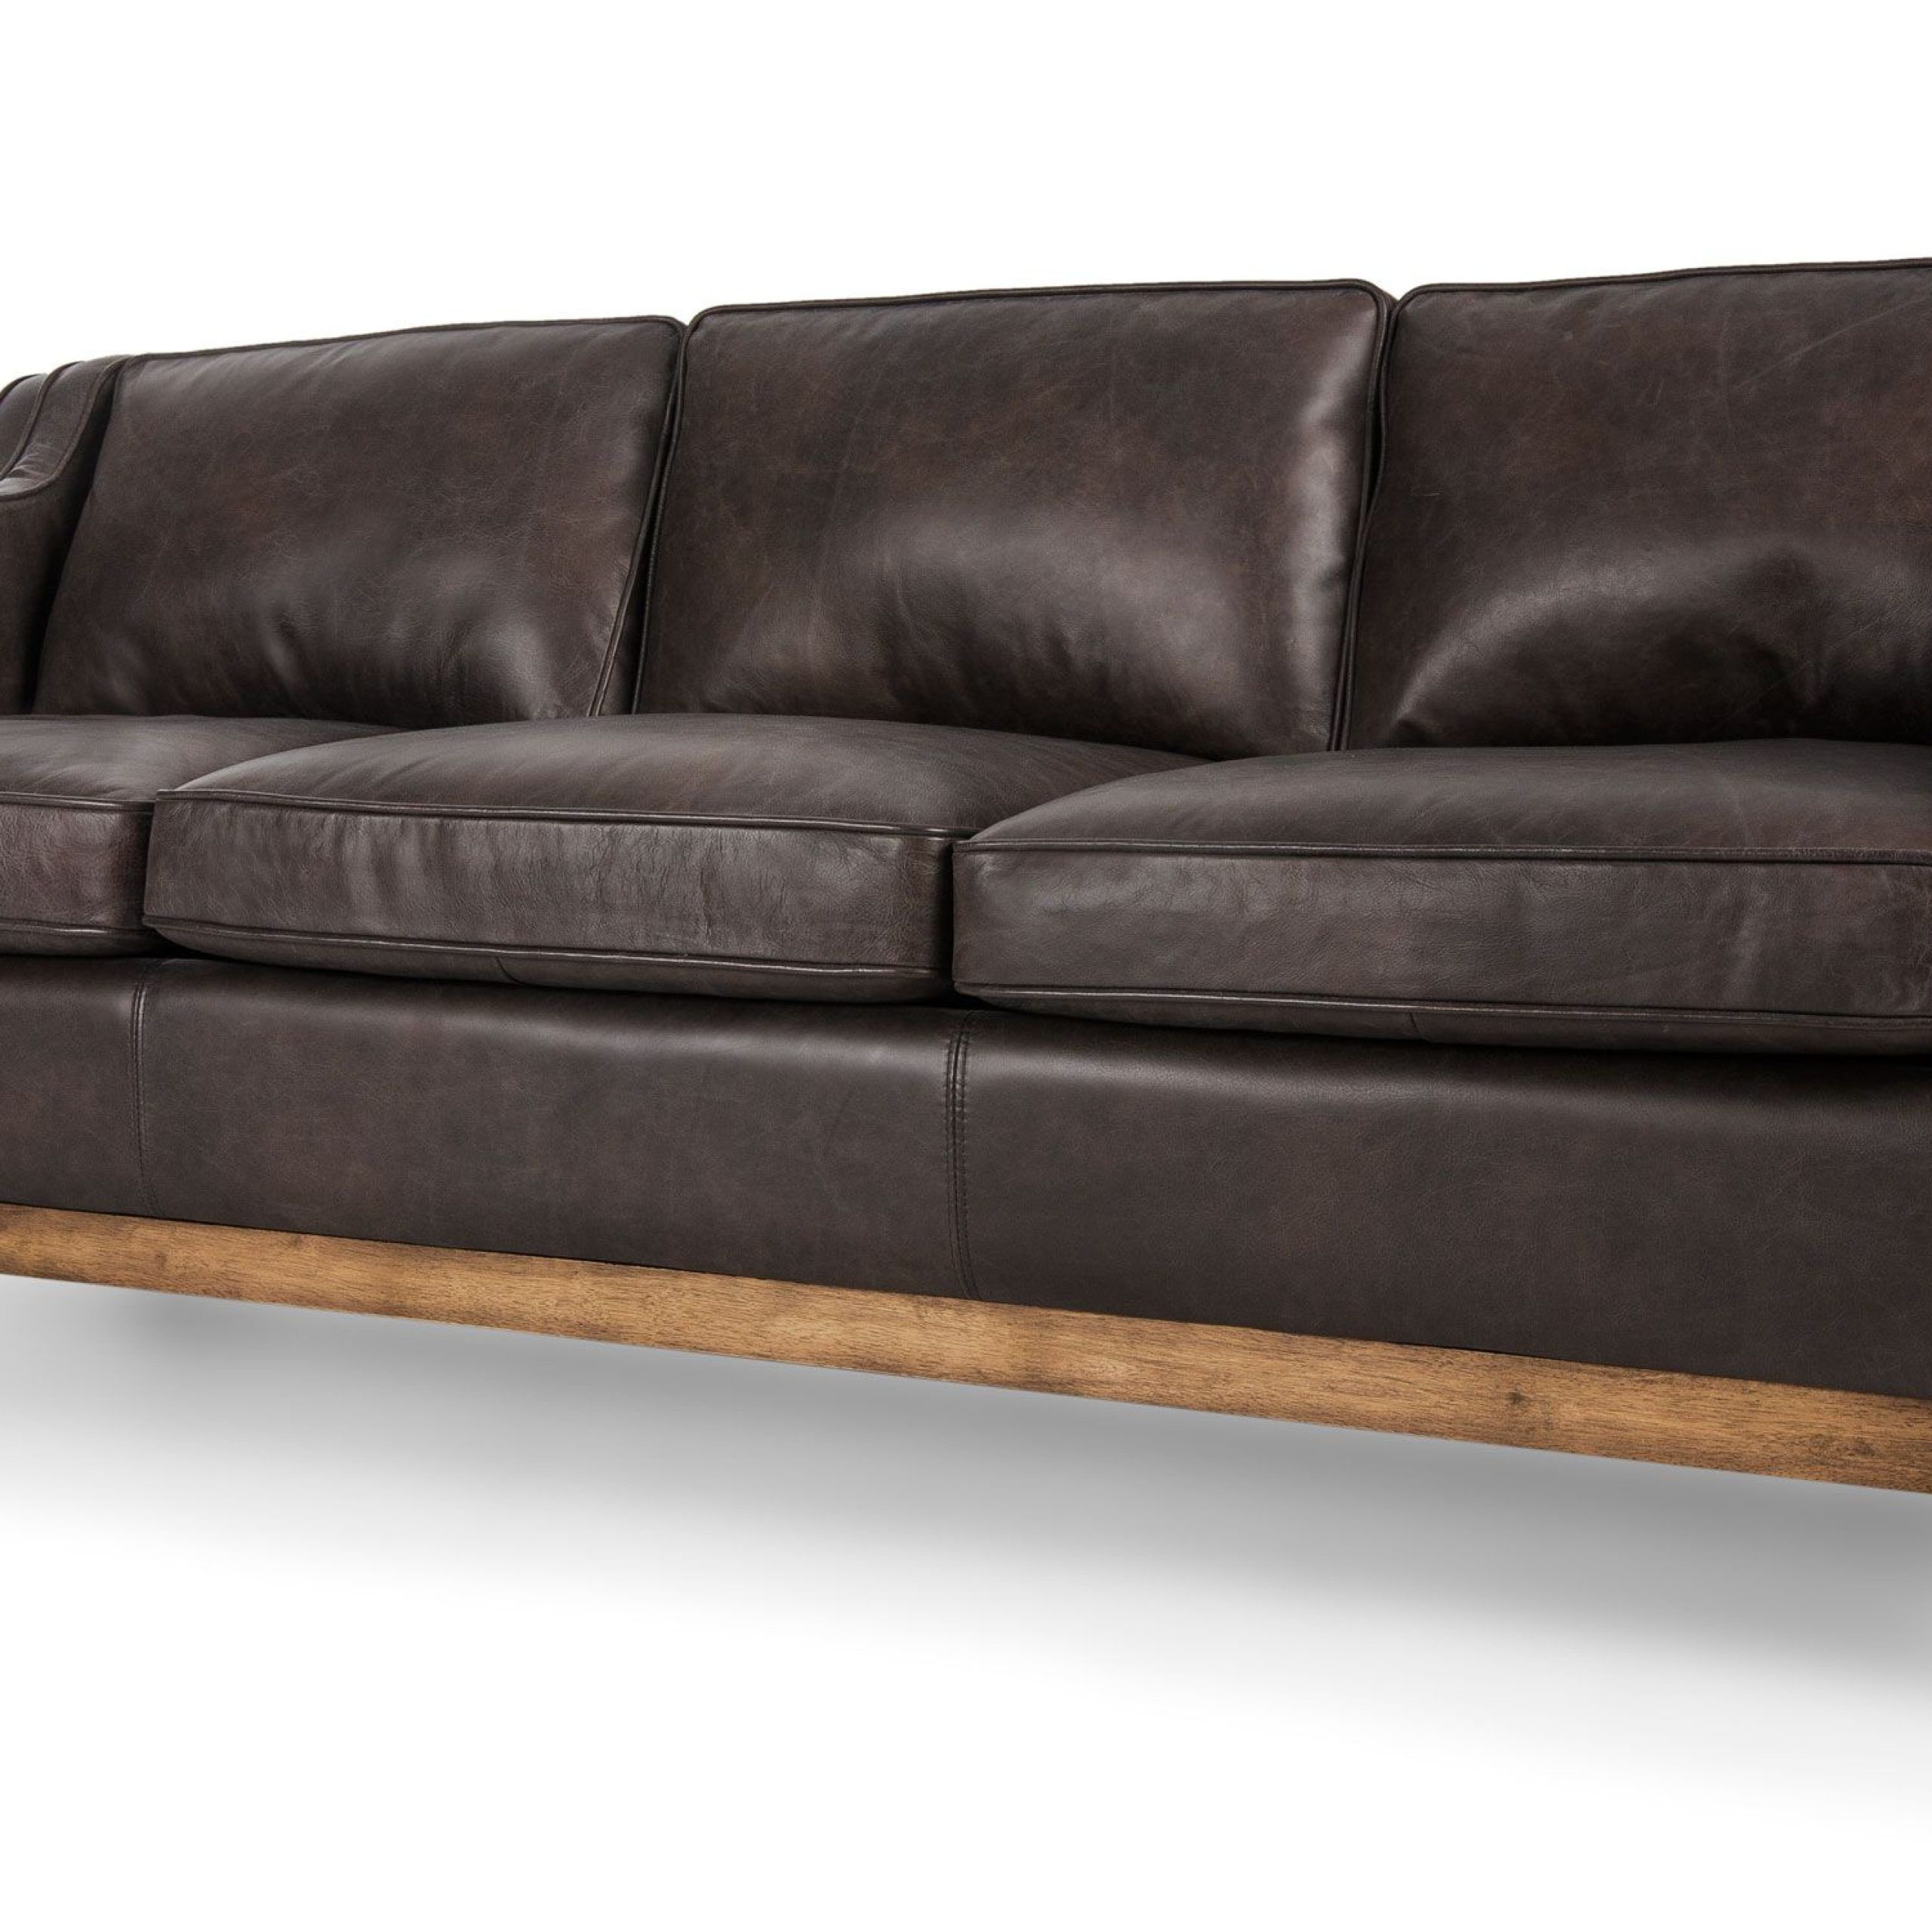 Worthington Oxford Brown Sofa – Sofas & Ottomans – Bryght | Modern, Mid Inside Sofas With Ottomans In Brown (Gallery 13 of 20)